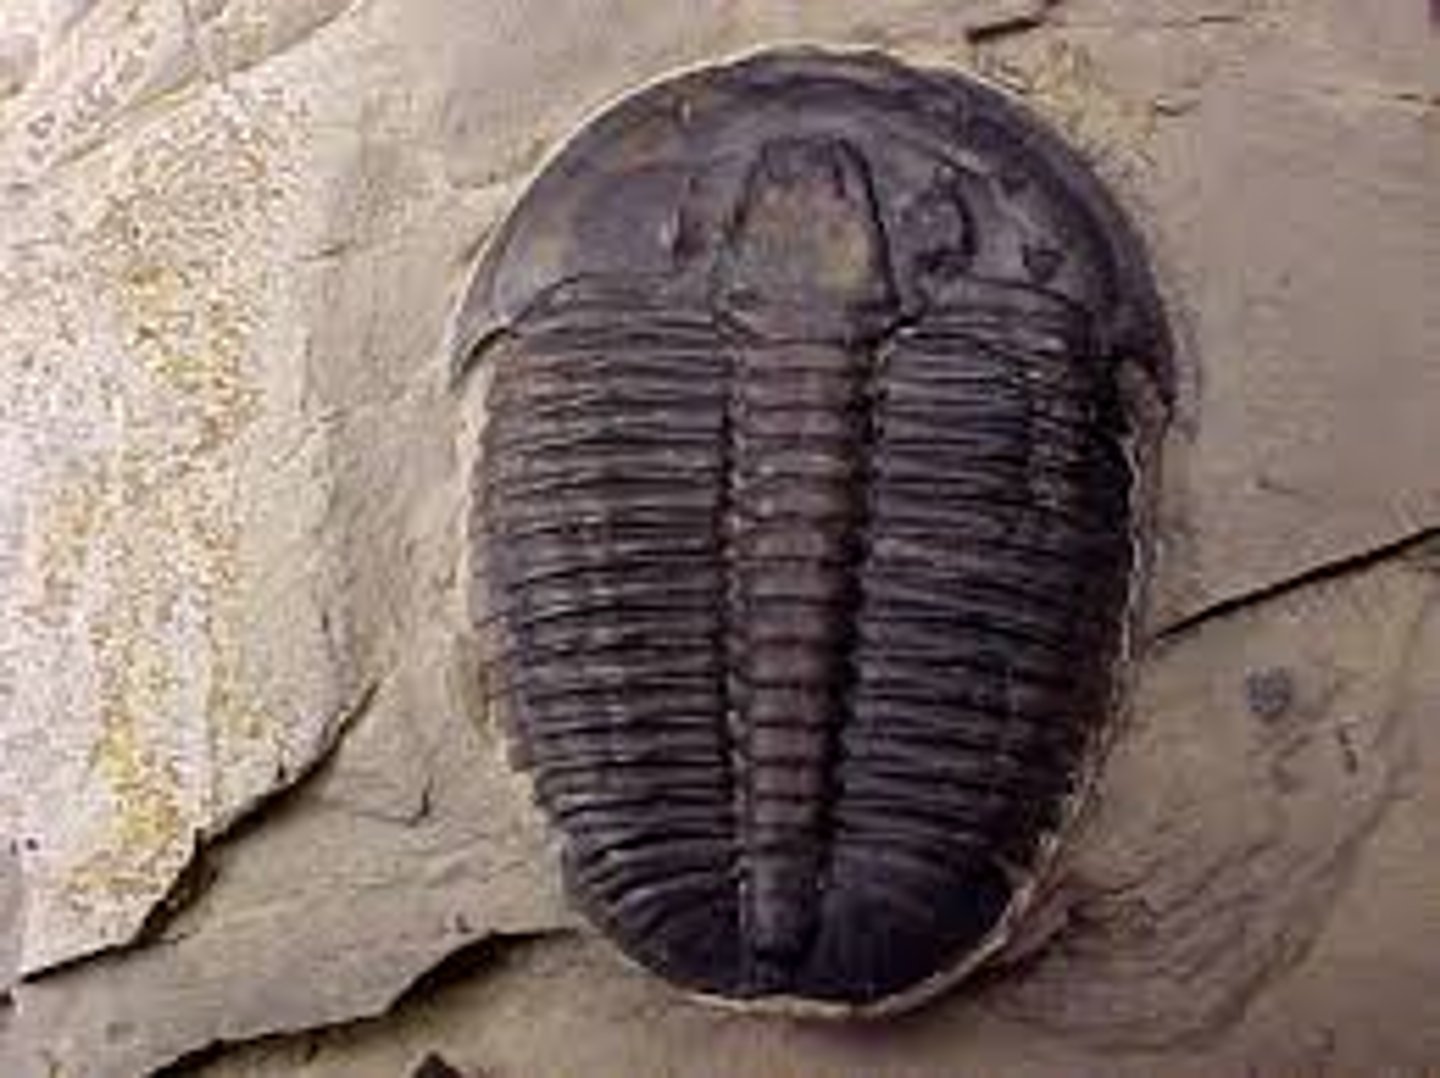 <p>Polymerid trilobite genus</p><p>a genus of trilobite belonging to Ptychopariacea known from the mid-Cambrian of Laurentia.</p>